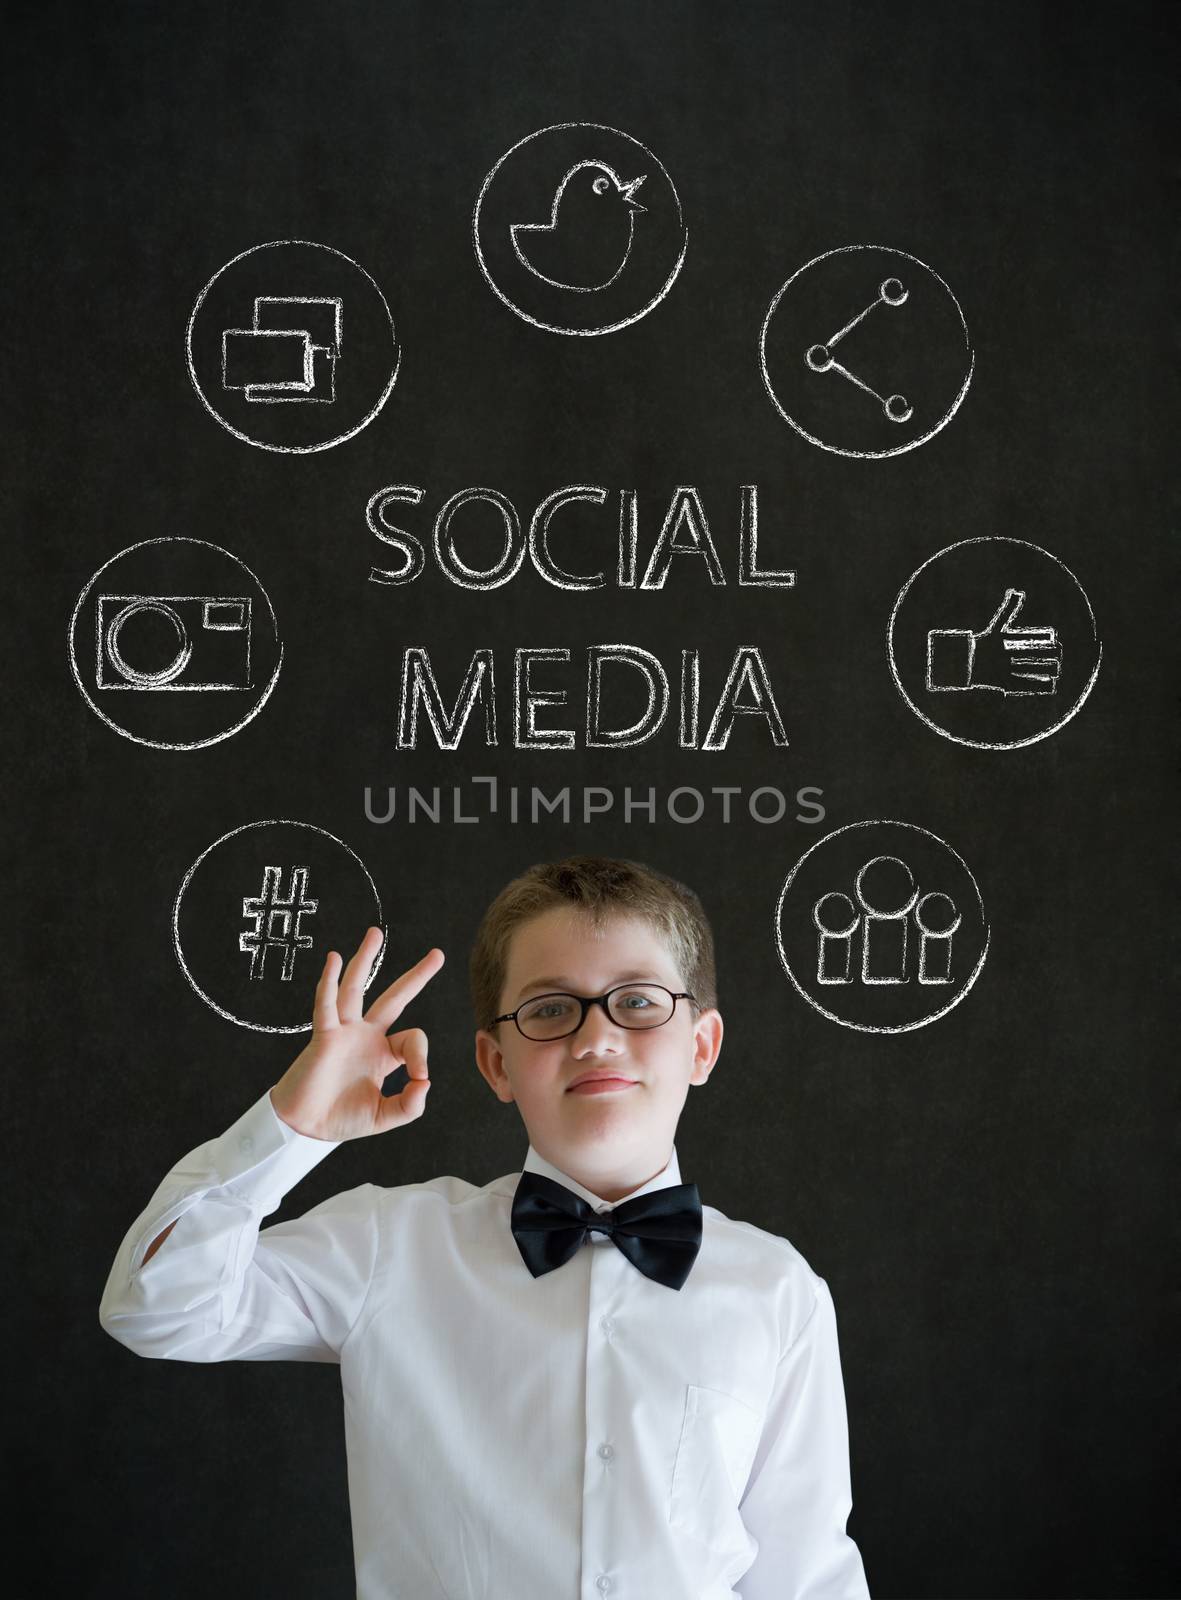 All ok or okay sign boy dressed up as business man with social media icons on blackboard background